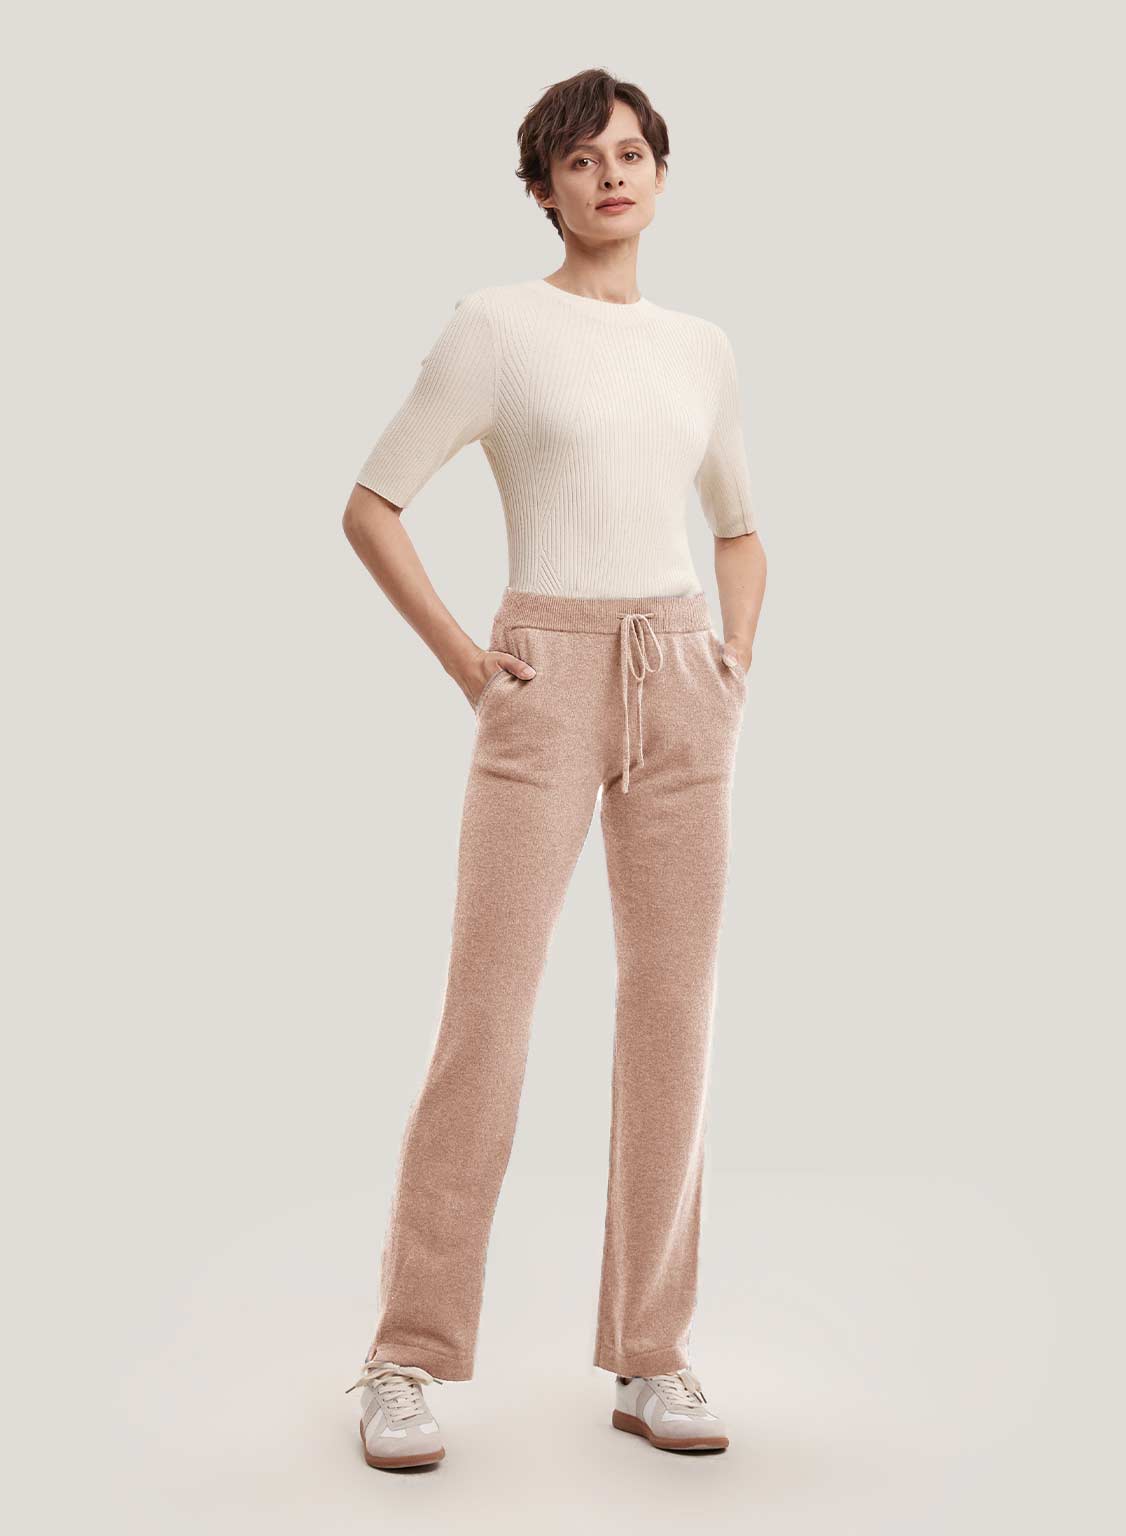 Chic cashmere pant available in a range of colors